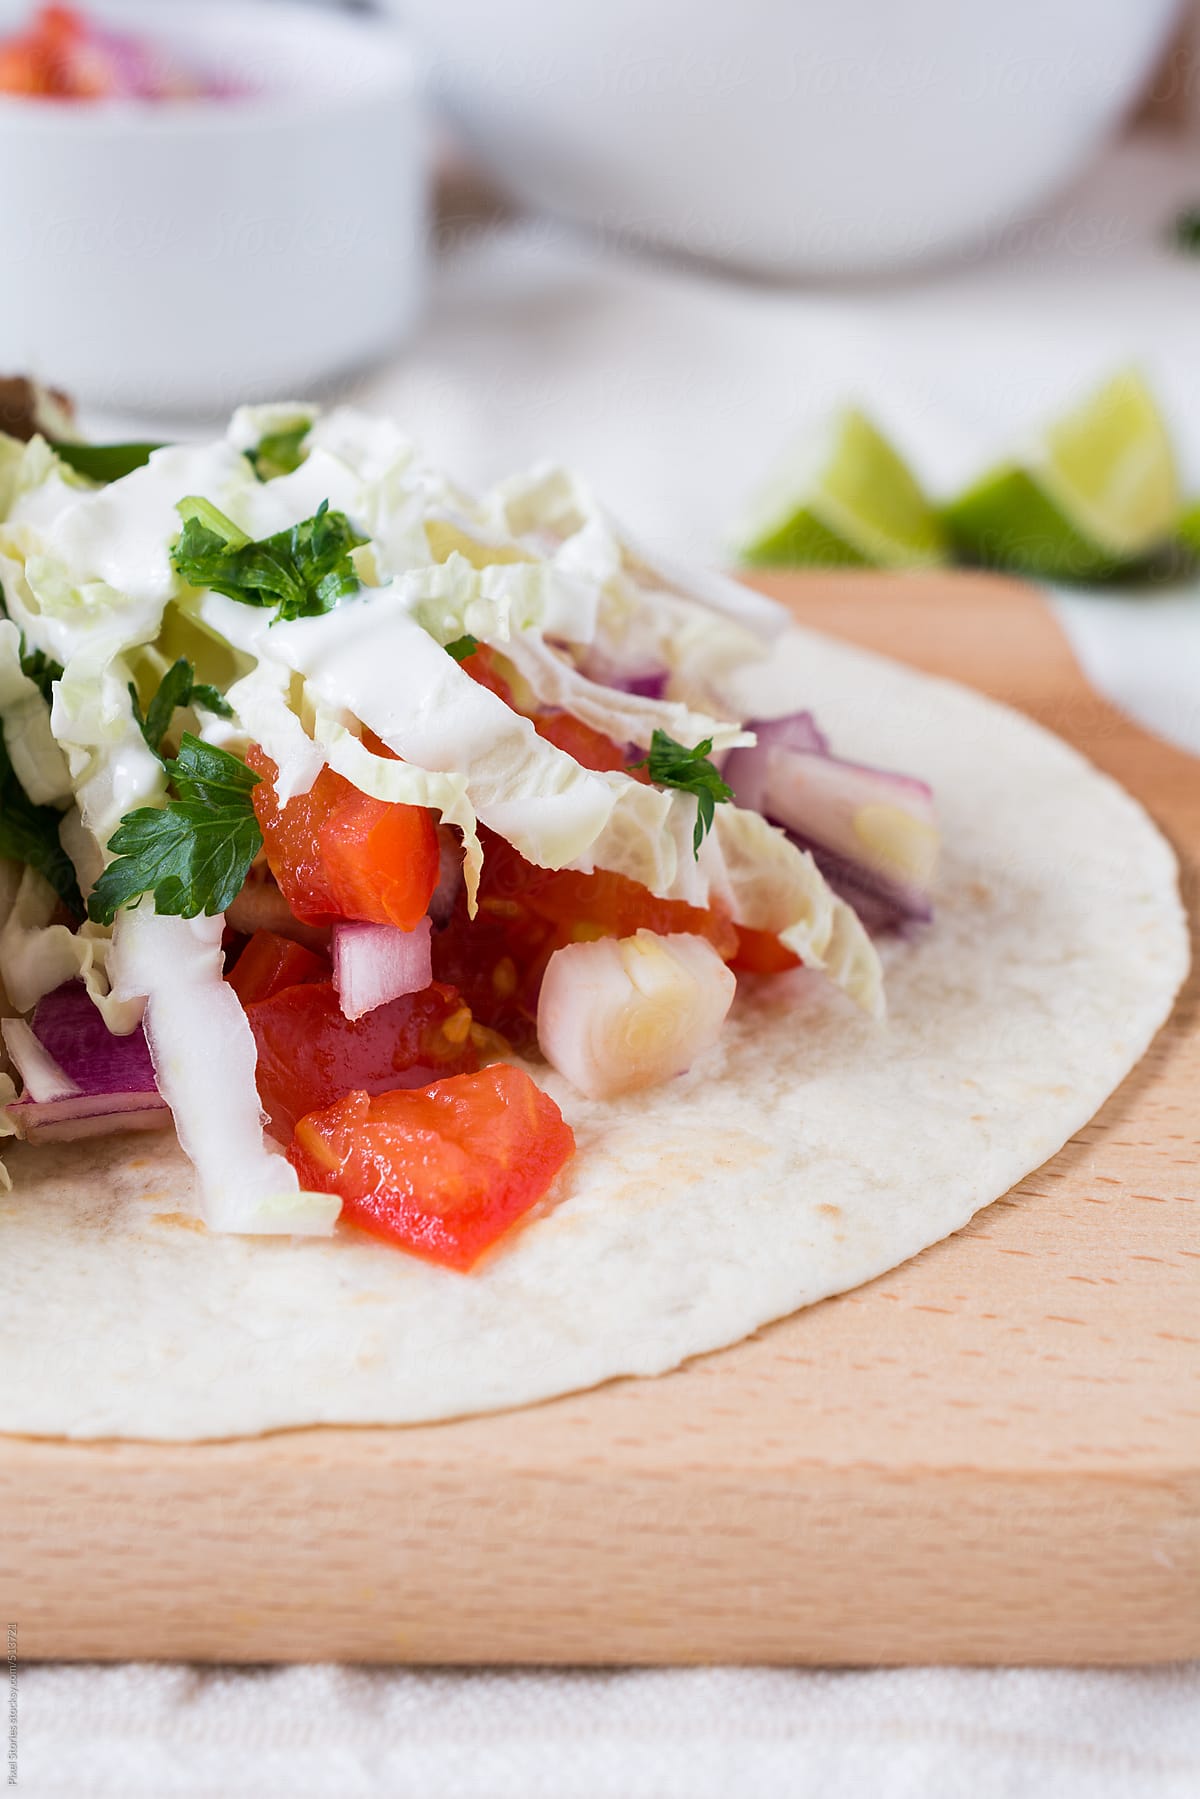 Food: close-up of tacos with roasted chicken, sour cream and vegetables